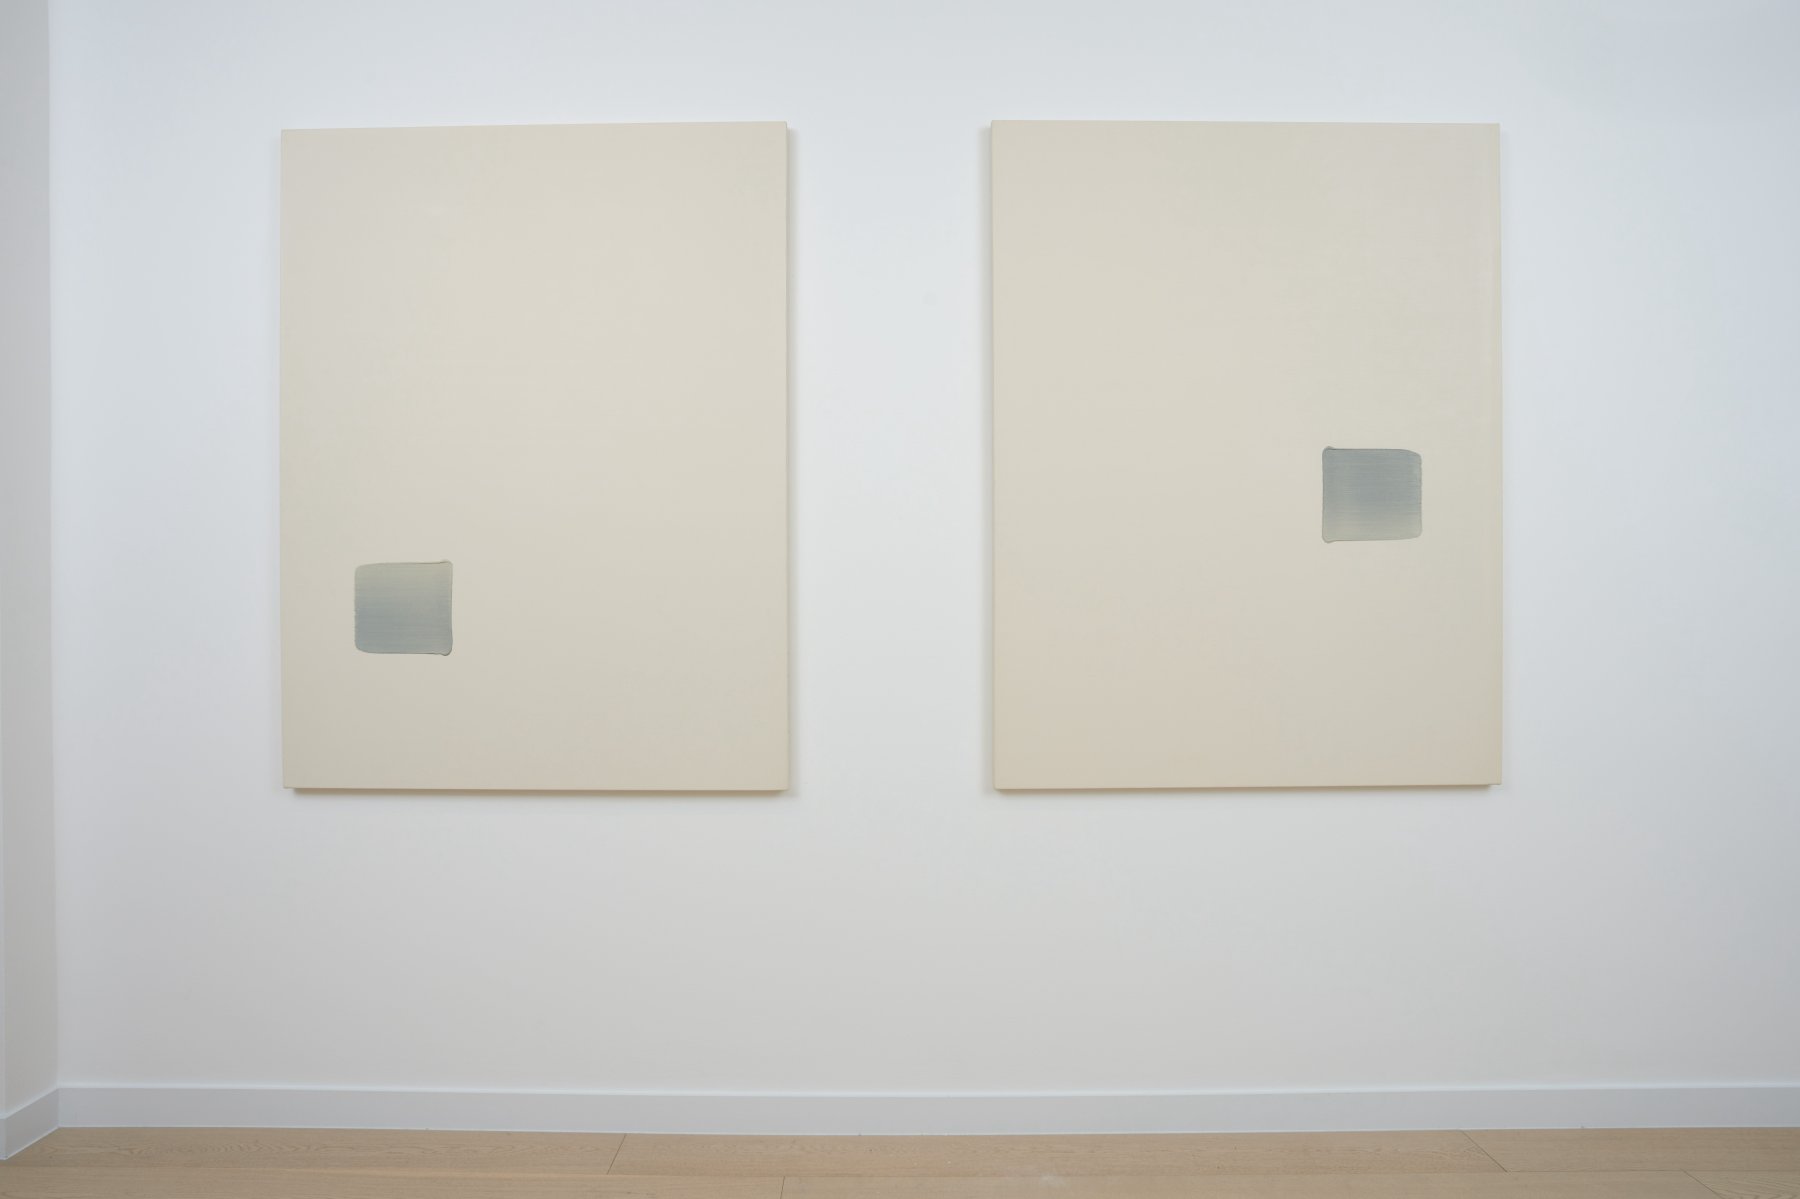 Installation image for Intercontinental Abstraction: Part 1, at Omer Tiroche Gallery